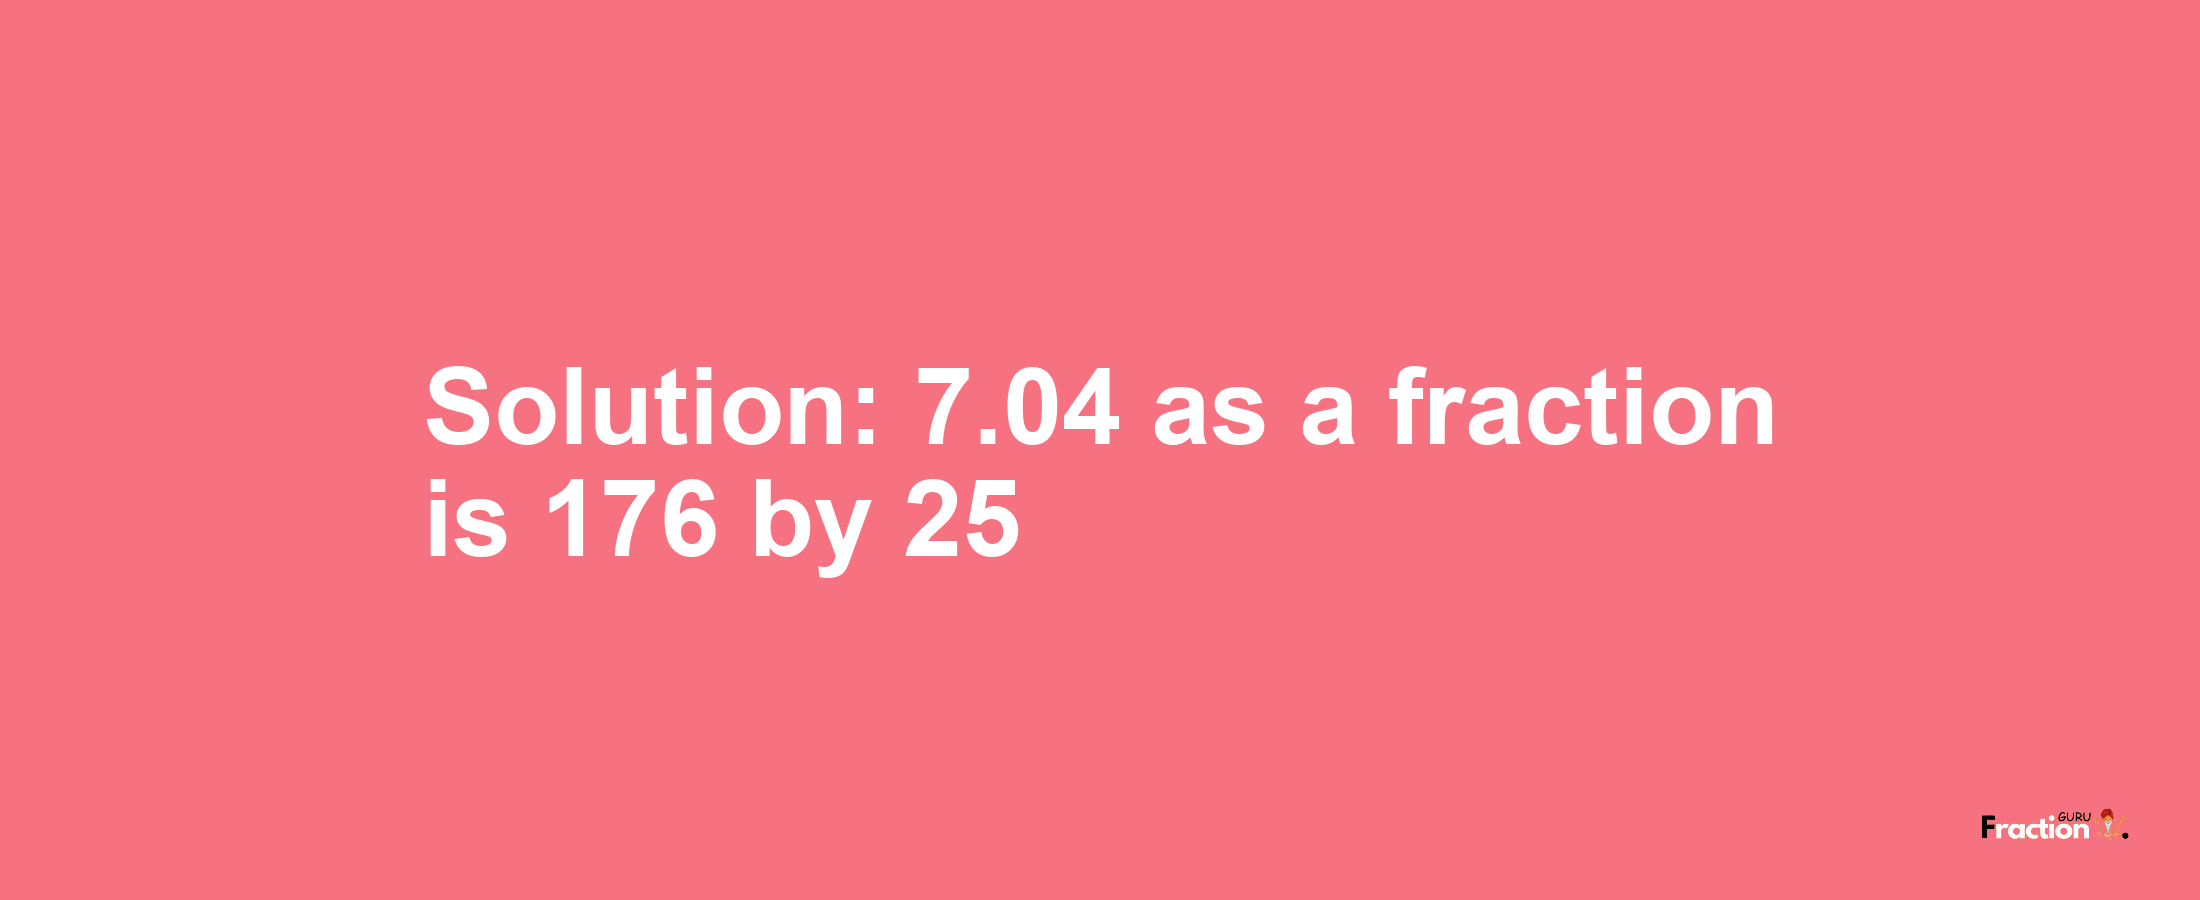 Solution:7.04 as a fraction is 176/25